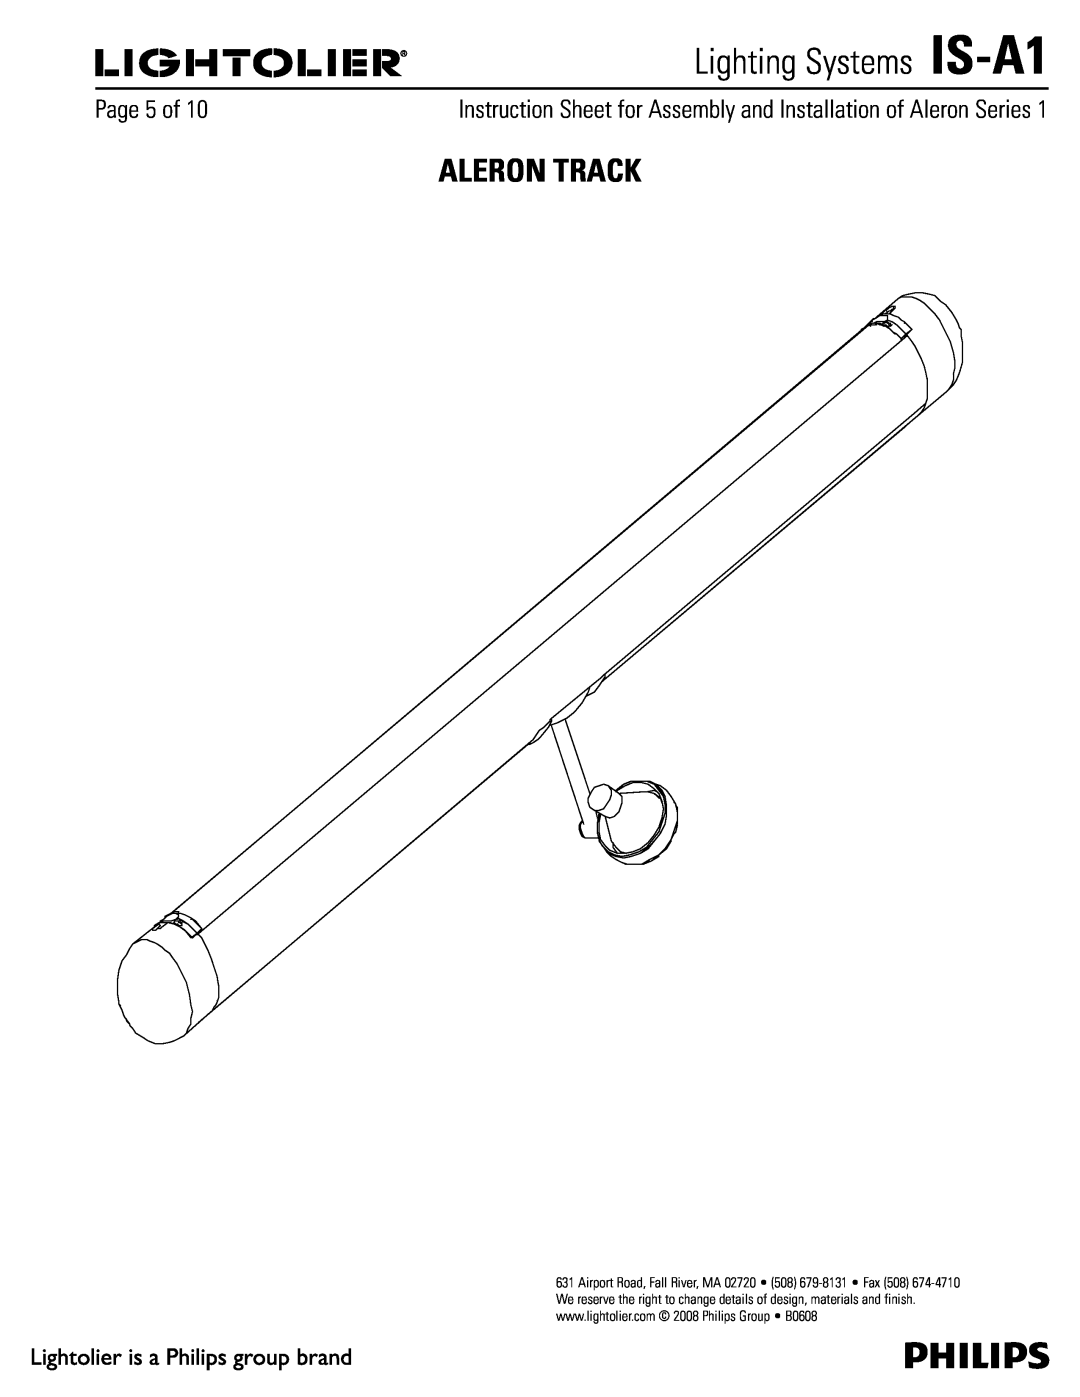 Lightolier manual Aleron Track, 1BHFPG, Lighting Systems IS-A1 